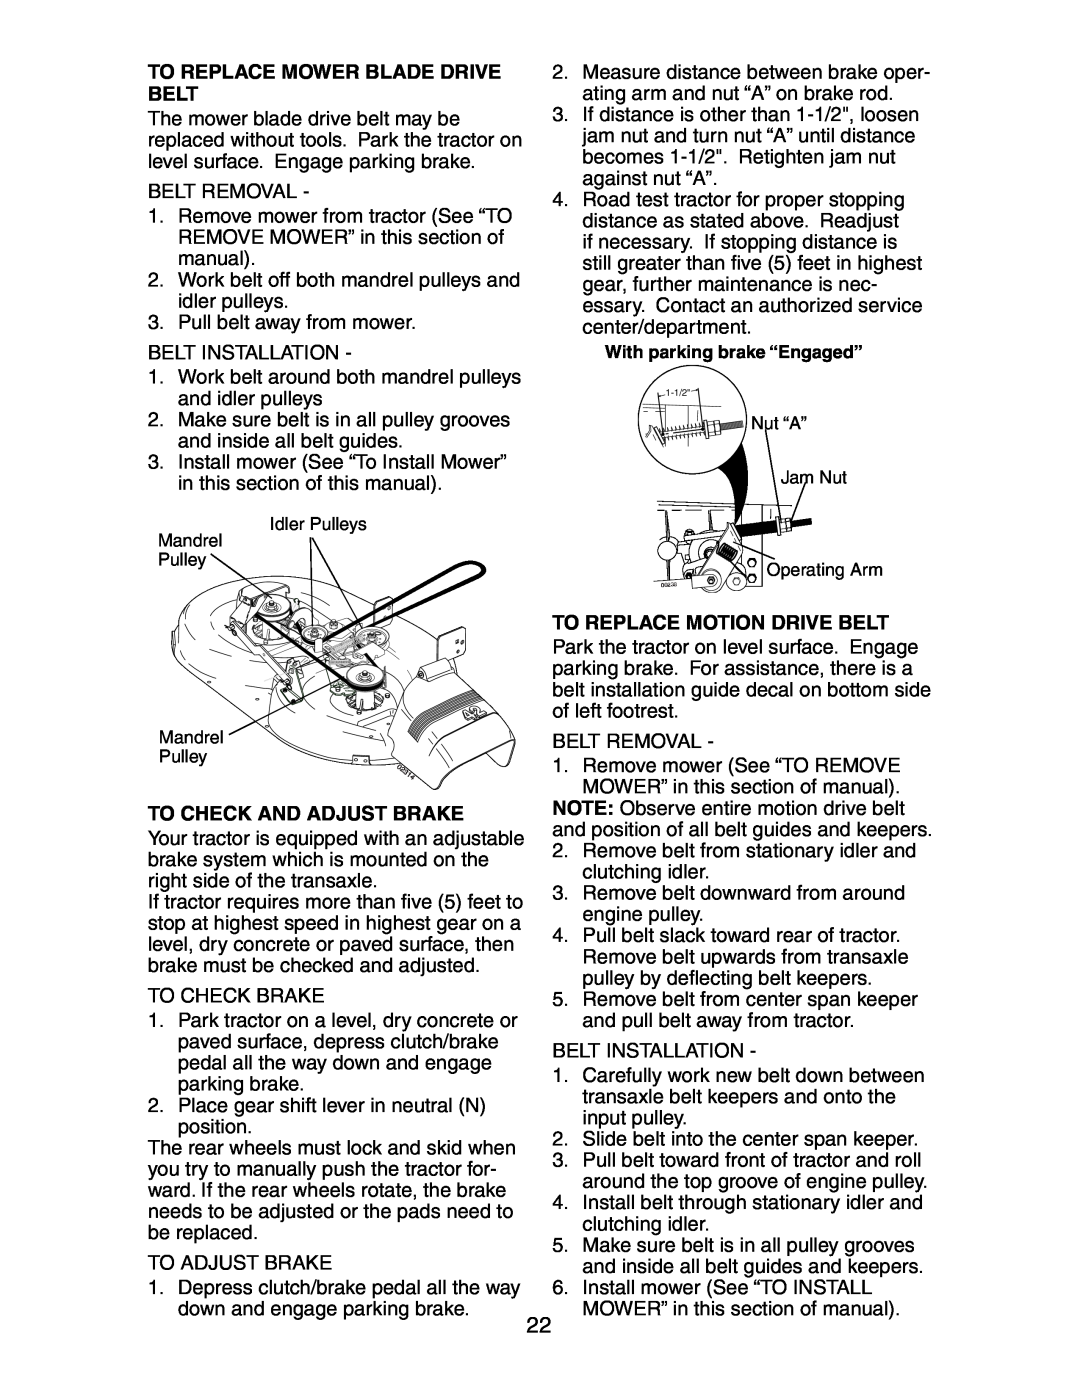 Poulan 191603 manual To Replace Mower Blade Drive Belt, To Check And Adjust Brake, To Replace Motion Drive Belt 